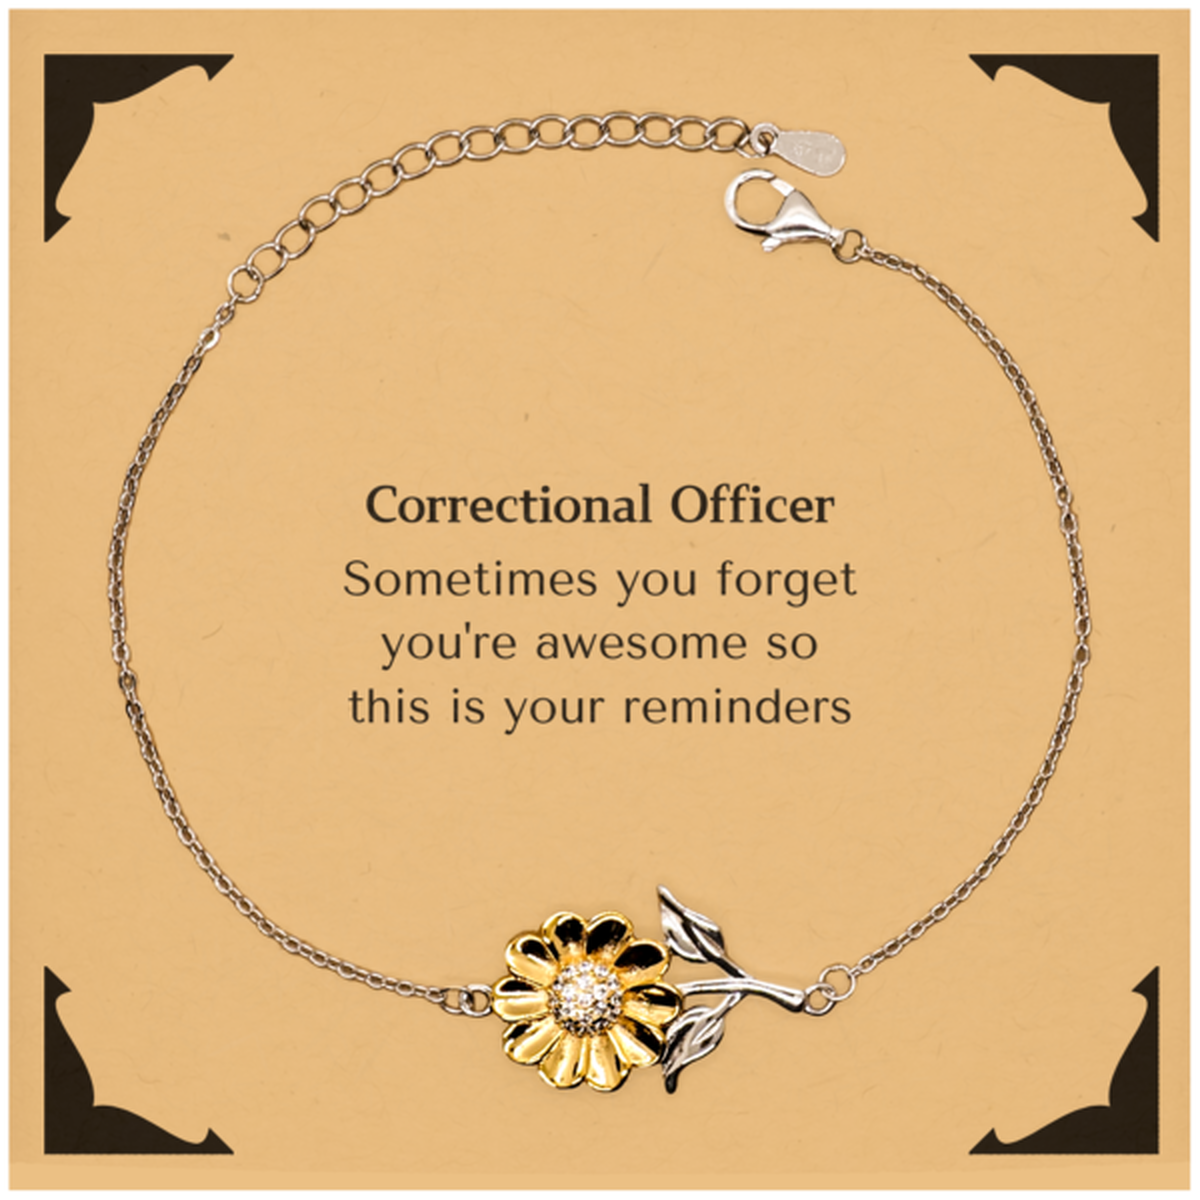 Sentimental Correctional Officer Sunflower Bracelet, Correctional Officer Sometimes you forget you're awesome so this is your reminders, Graduation Christmas Birthday Gifts for Correctional Officer, Men, Women, Coworkers